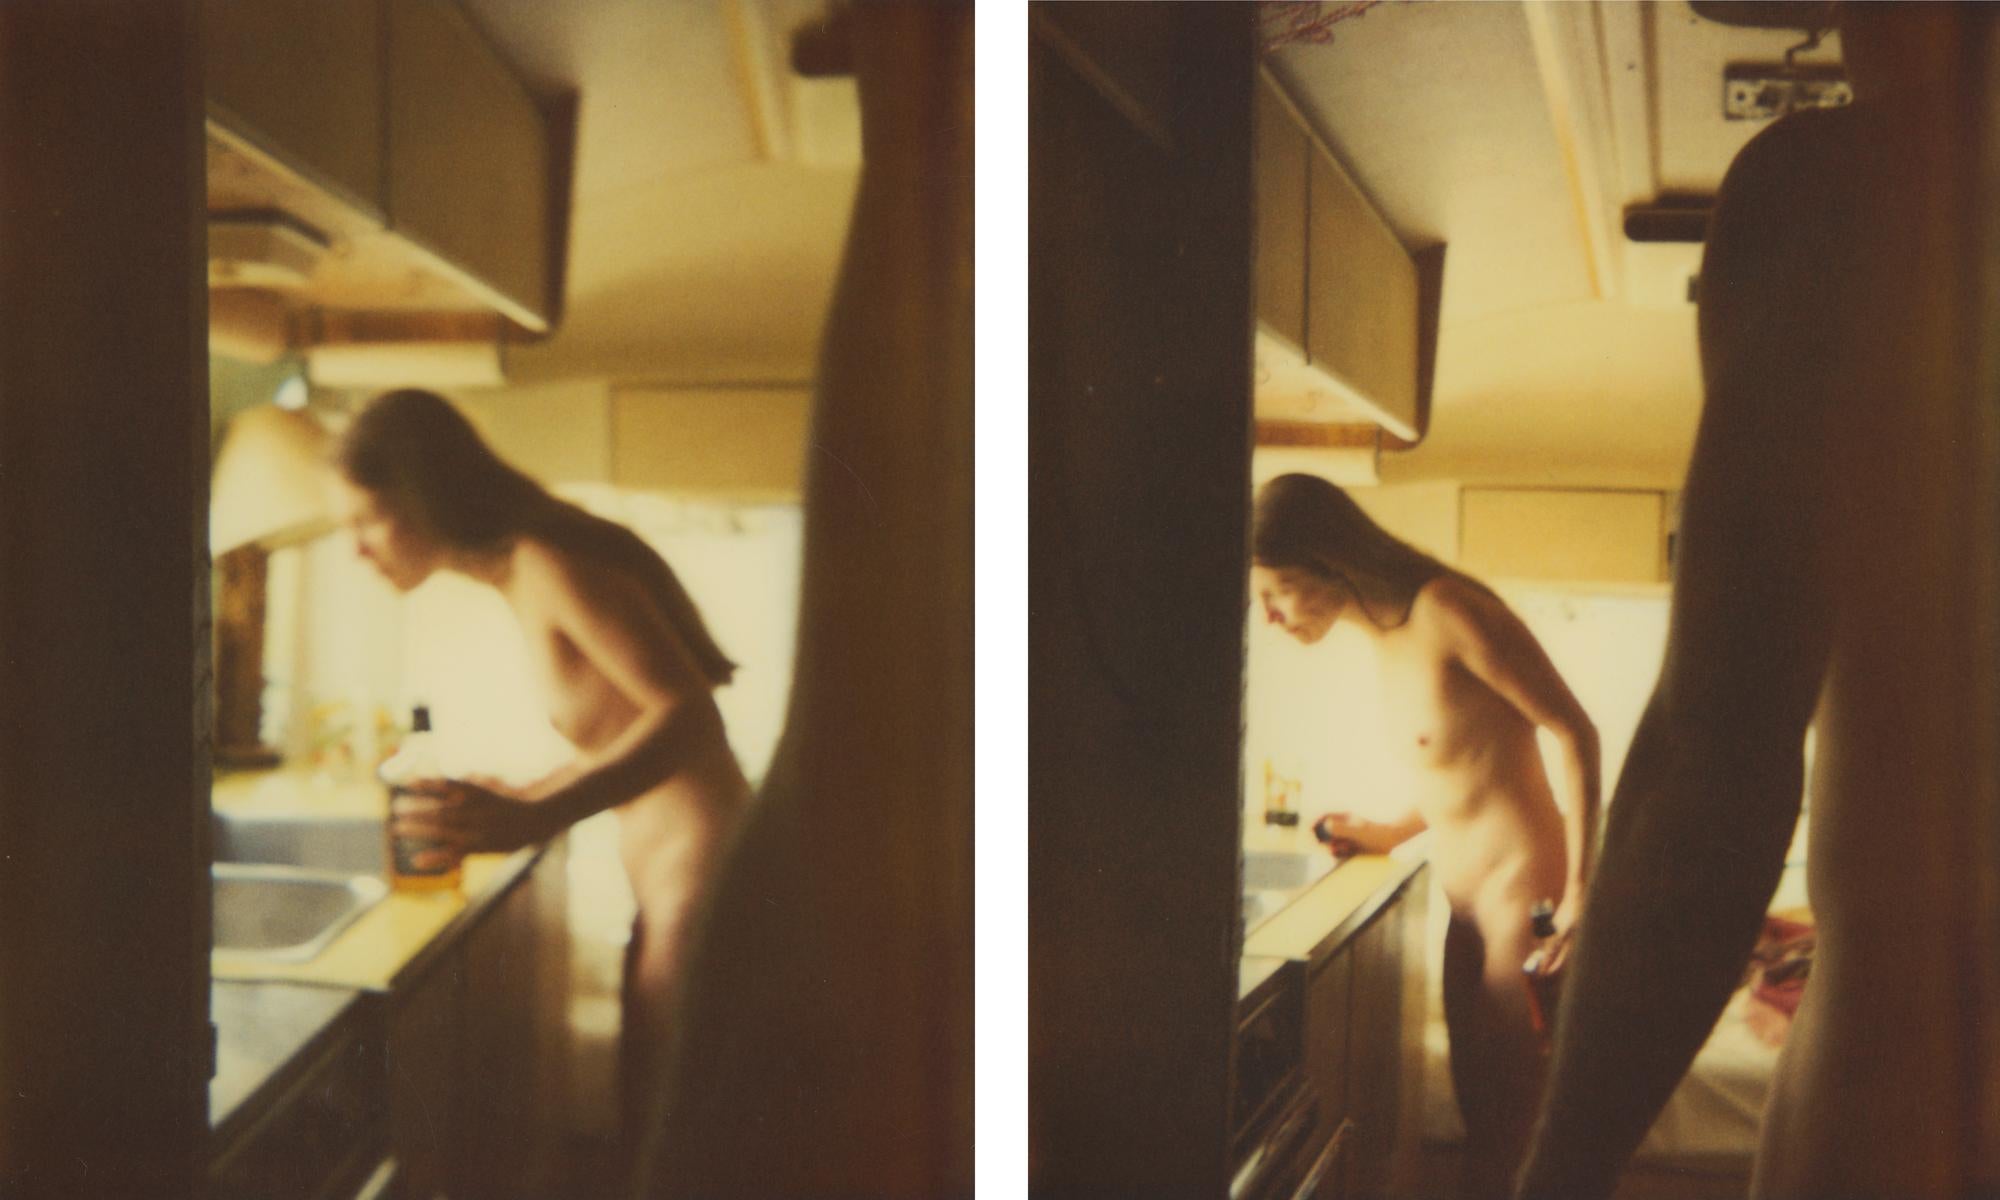 Stefanie Schneider Color Photograph - Whisky and Water VI - Sidewinder - Diptych, Polaroid, Nude, 21st Century, Color